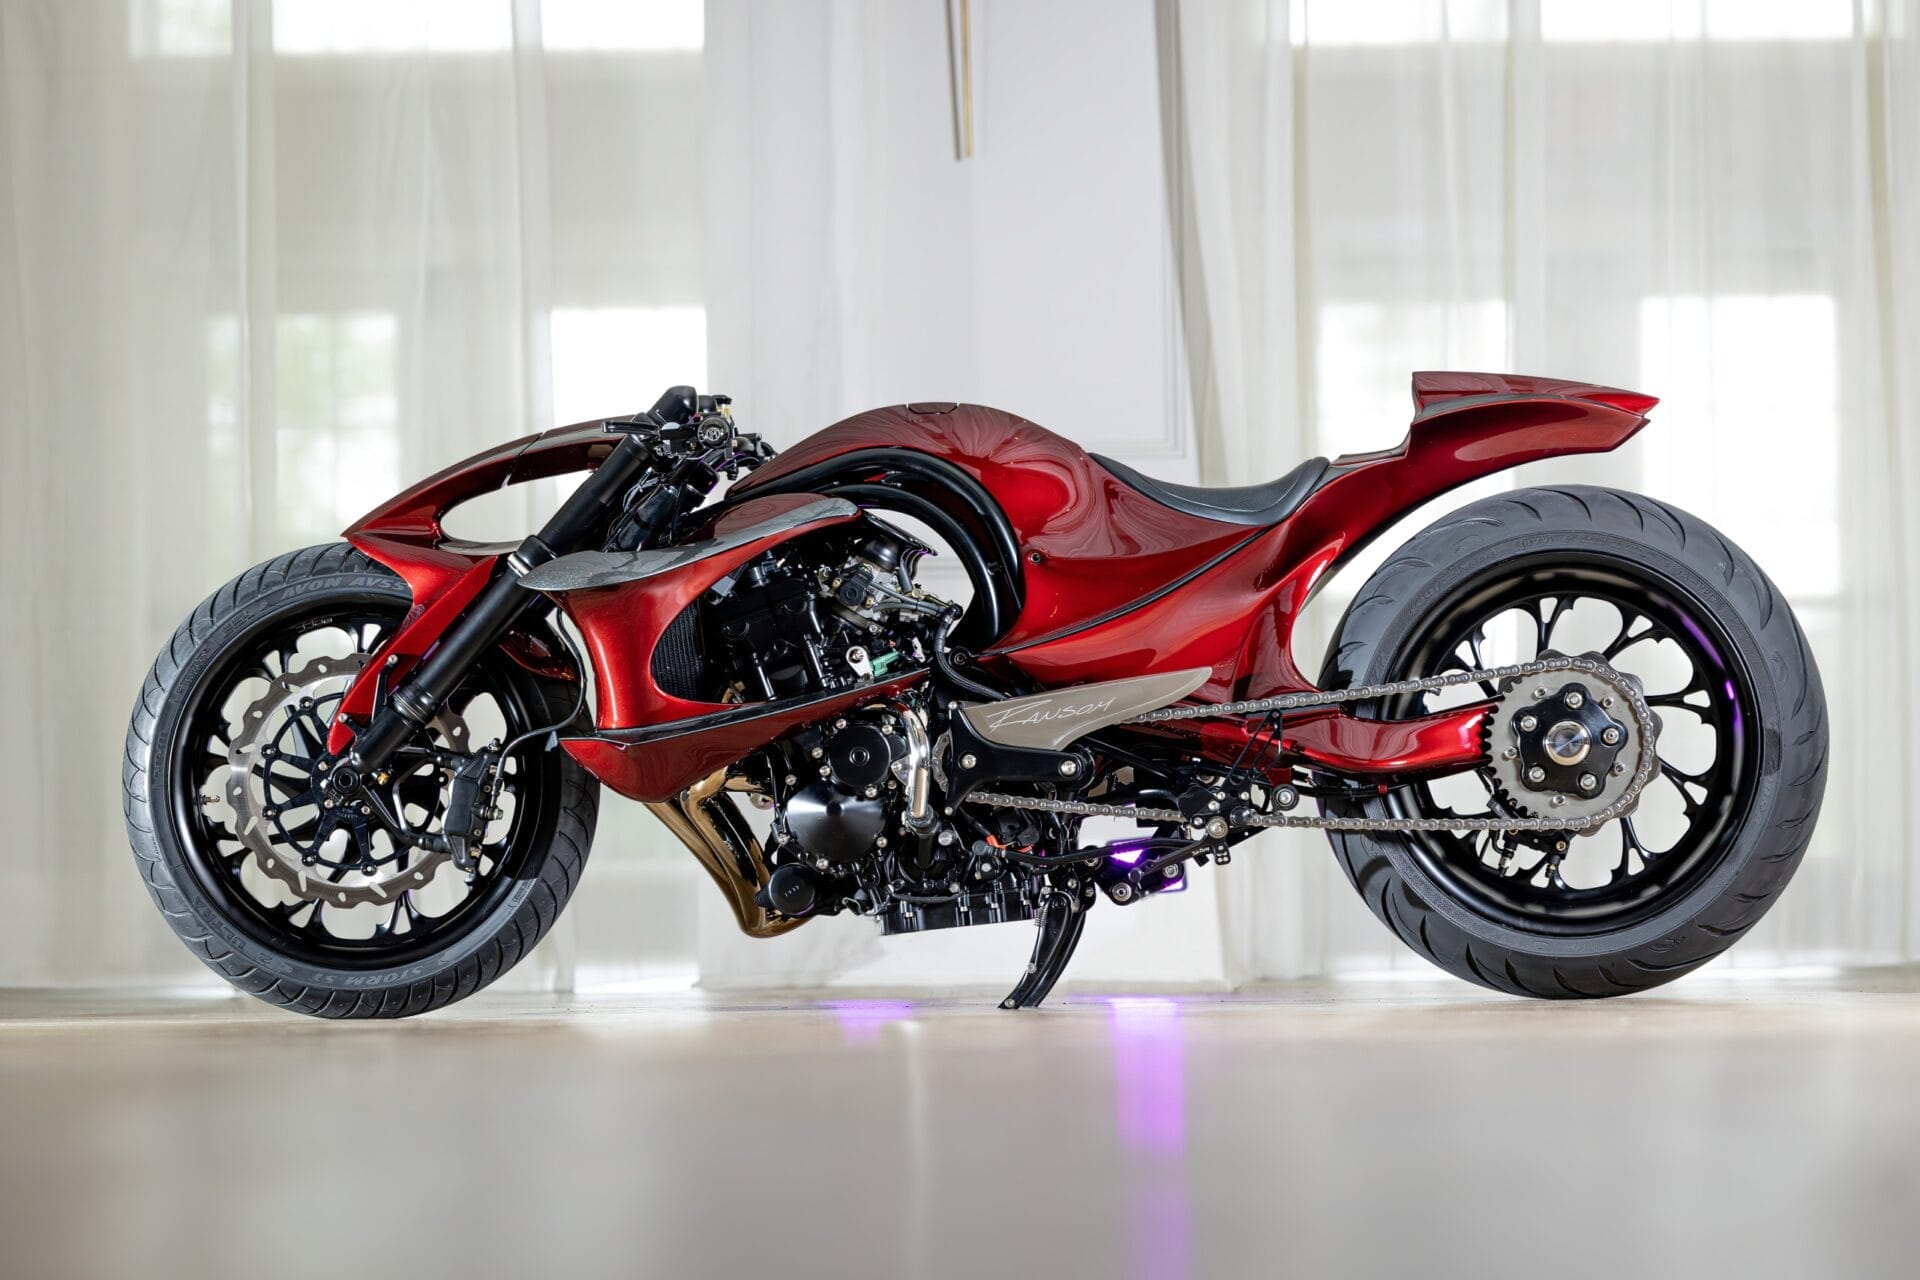 Archangel from Ransom Motorcycles – Unique masterpieces on two wheels